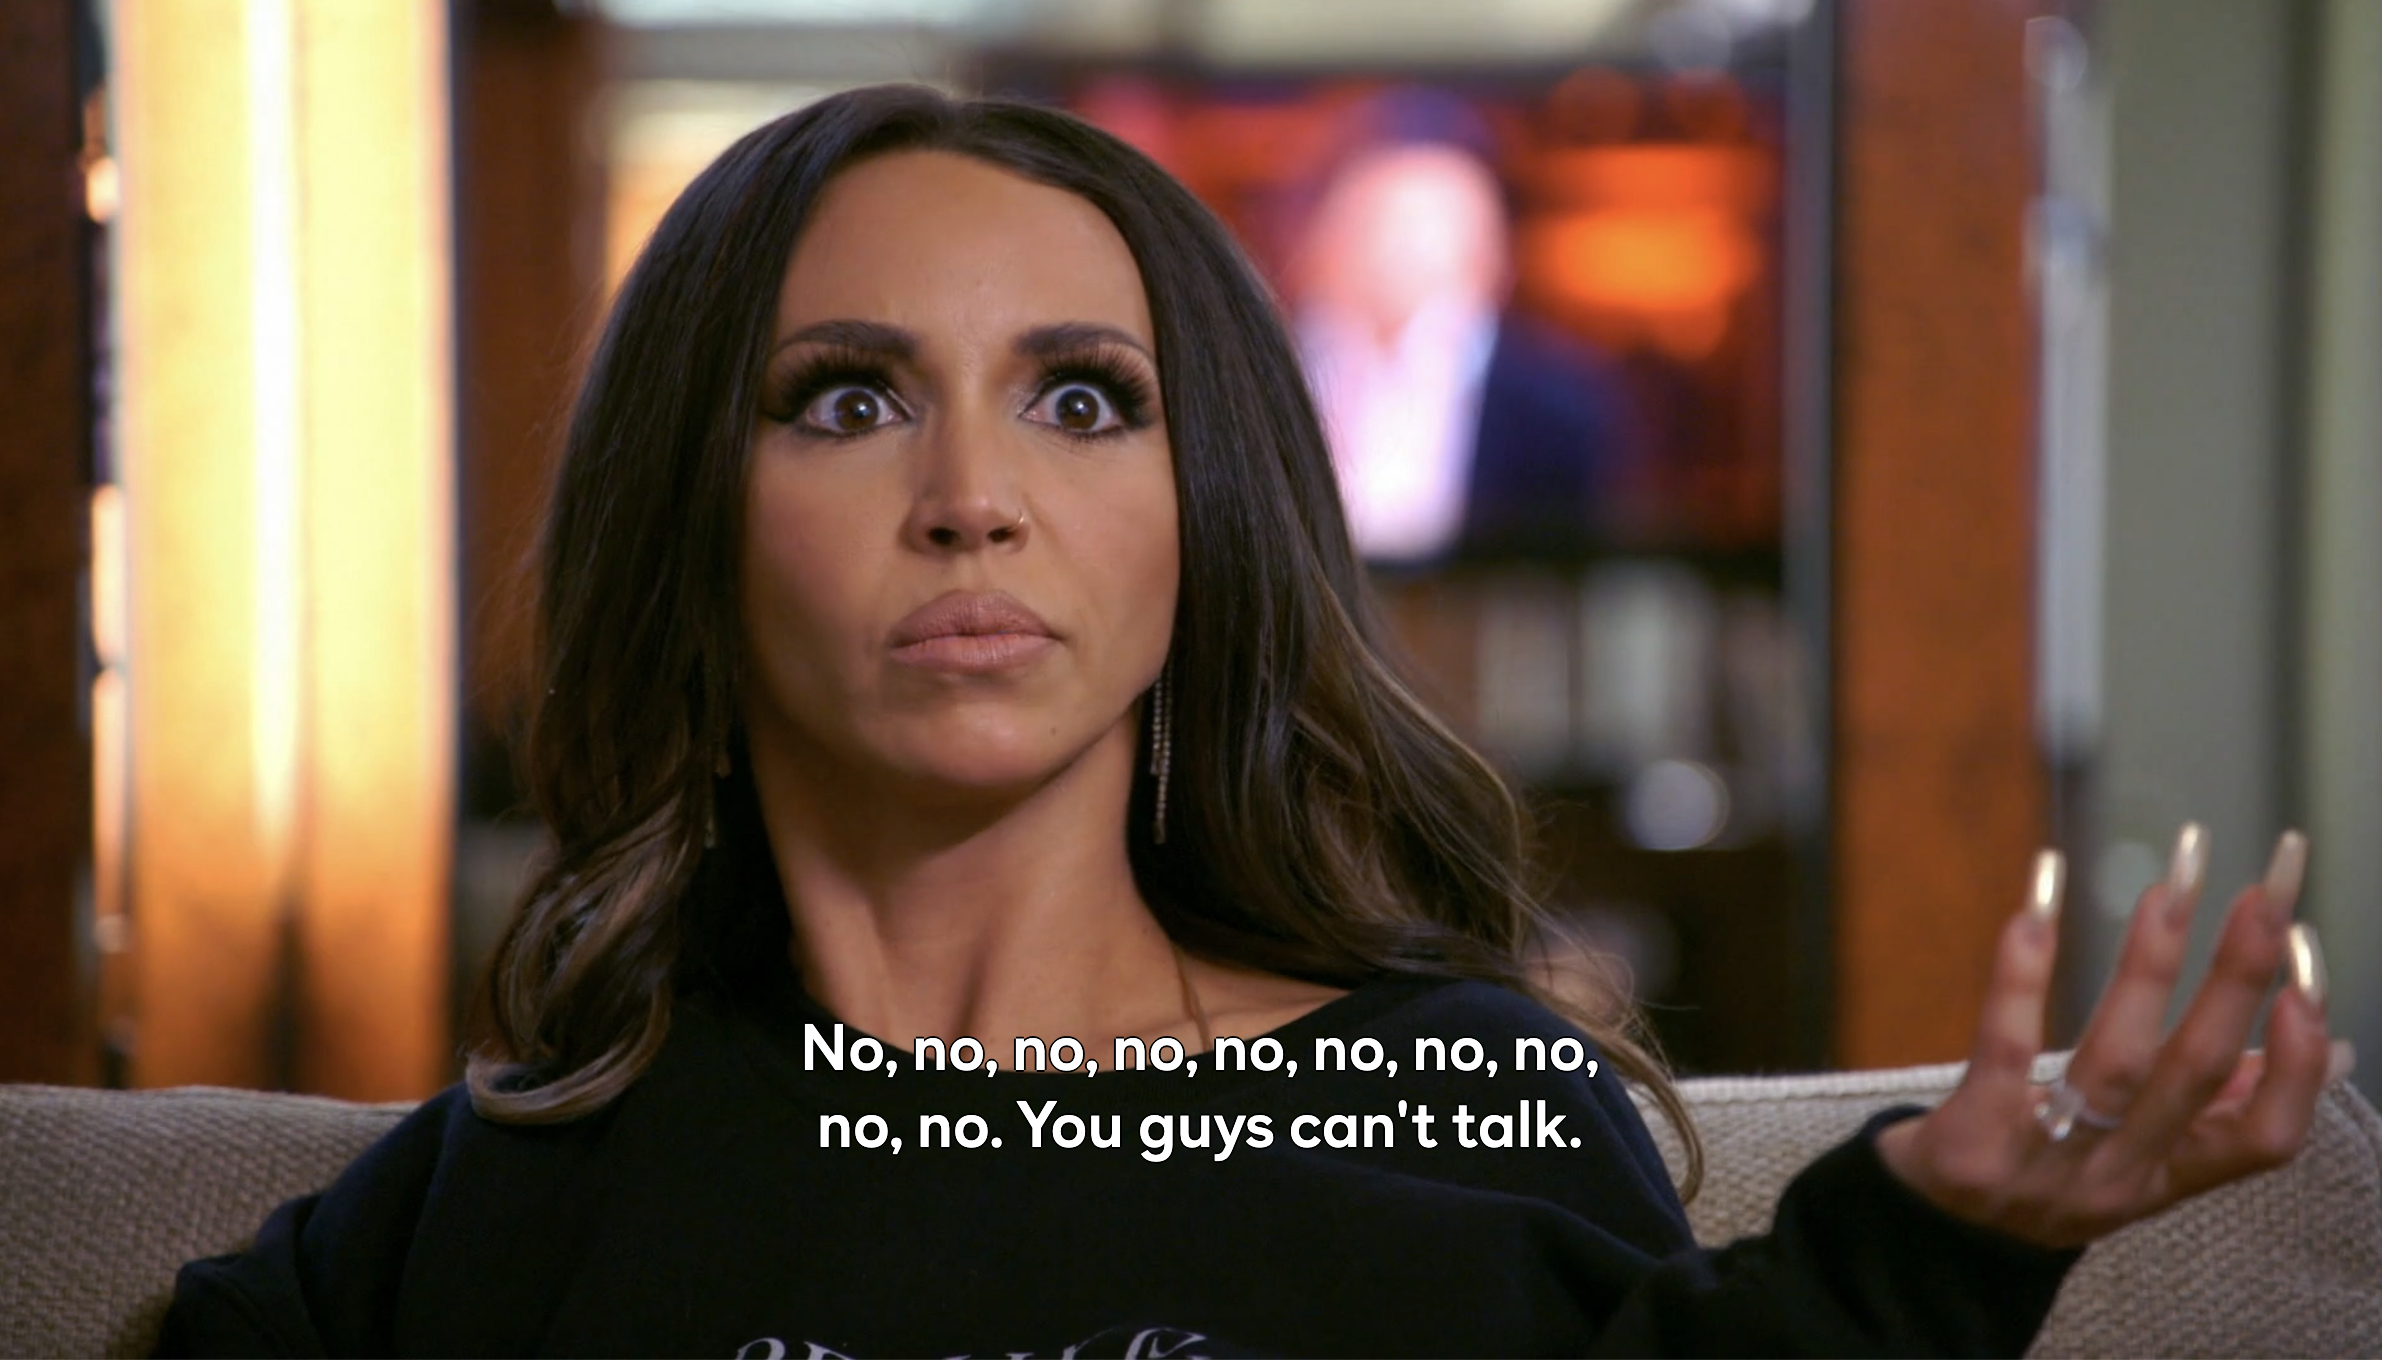 Scheana in her trailer with caption &quot;No, no, no, no no, you guys can&#x27;t talk&quot;